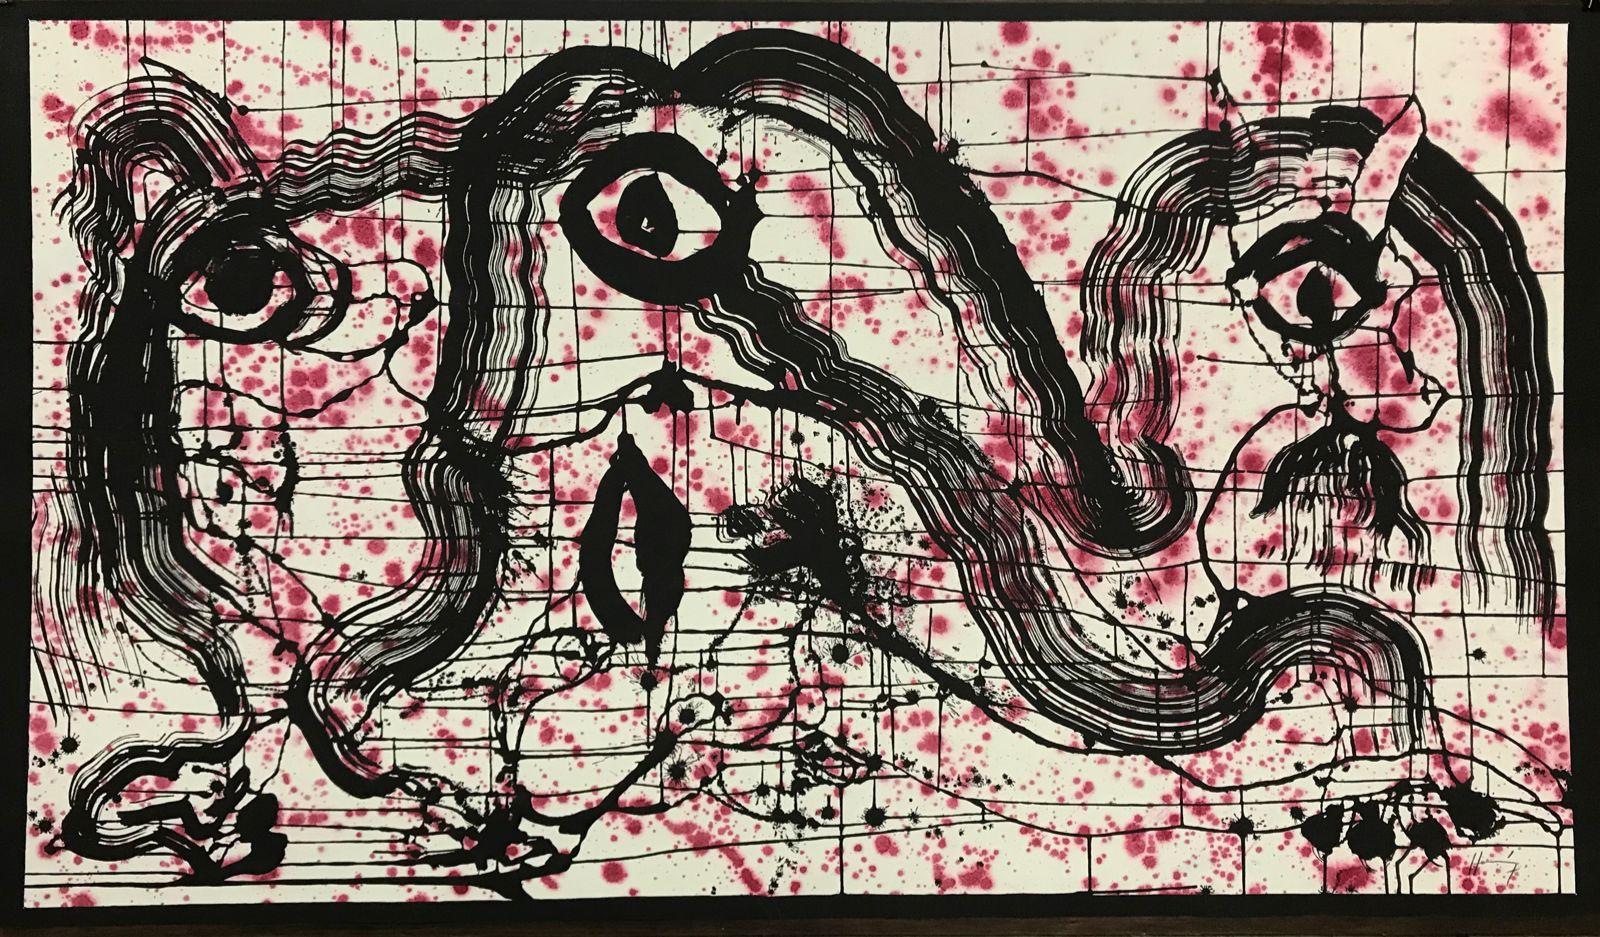 Sergio Hernández, 'Untitled', 2016, Woodcut, 46.9x82.7 in